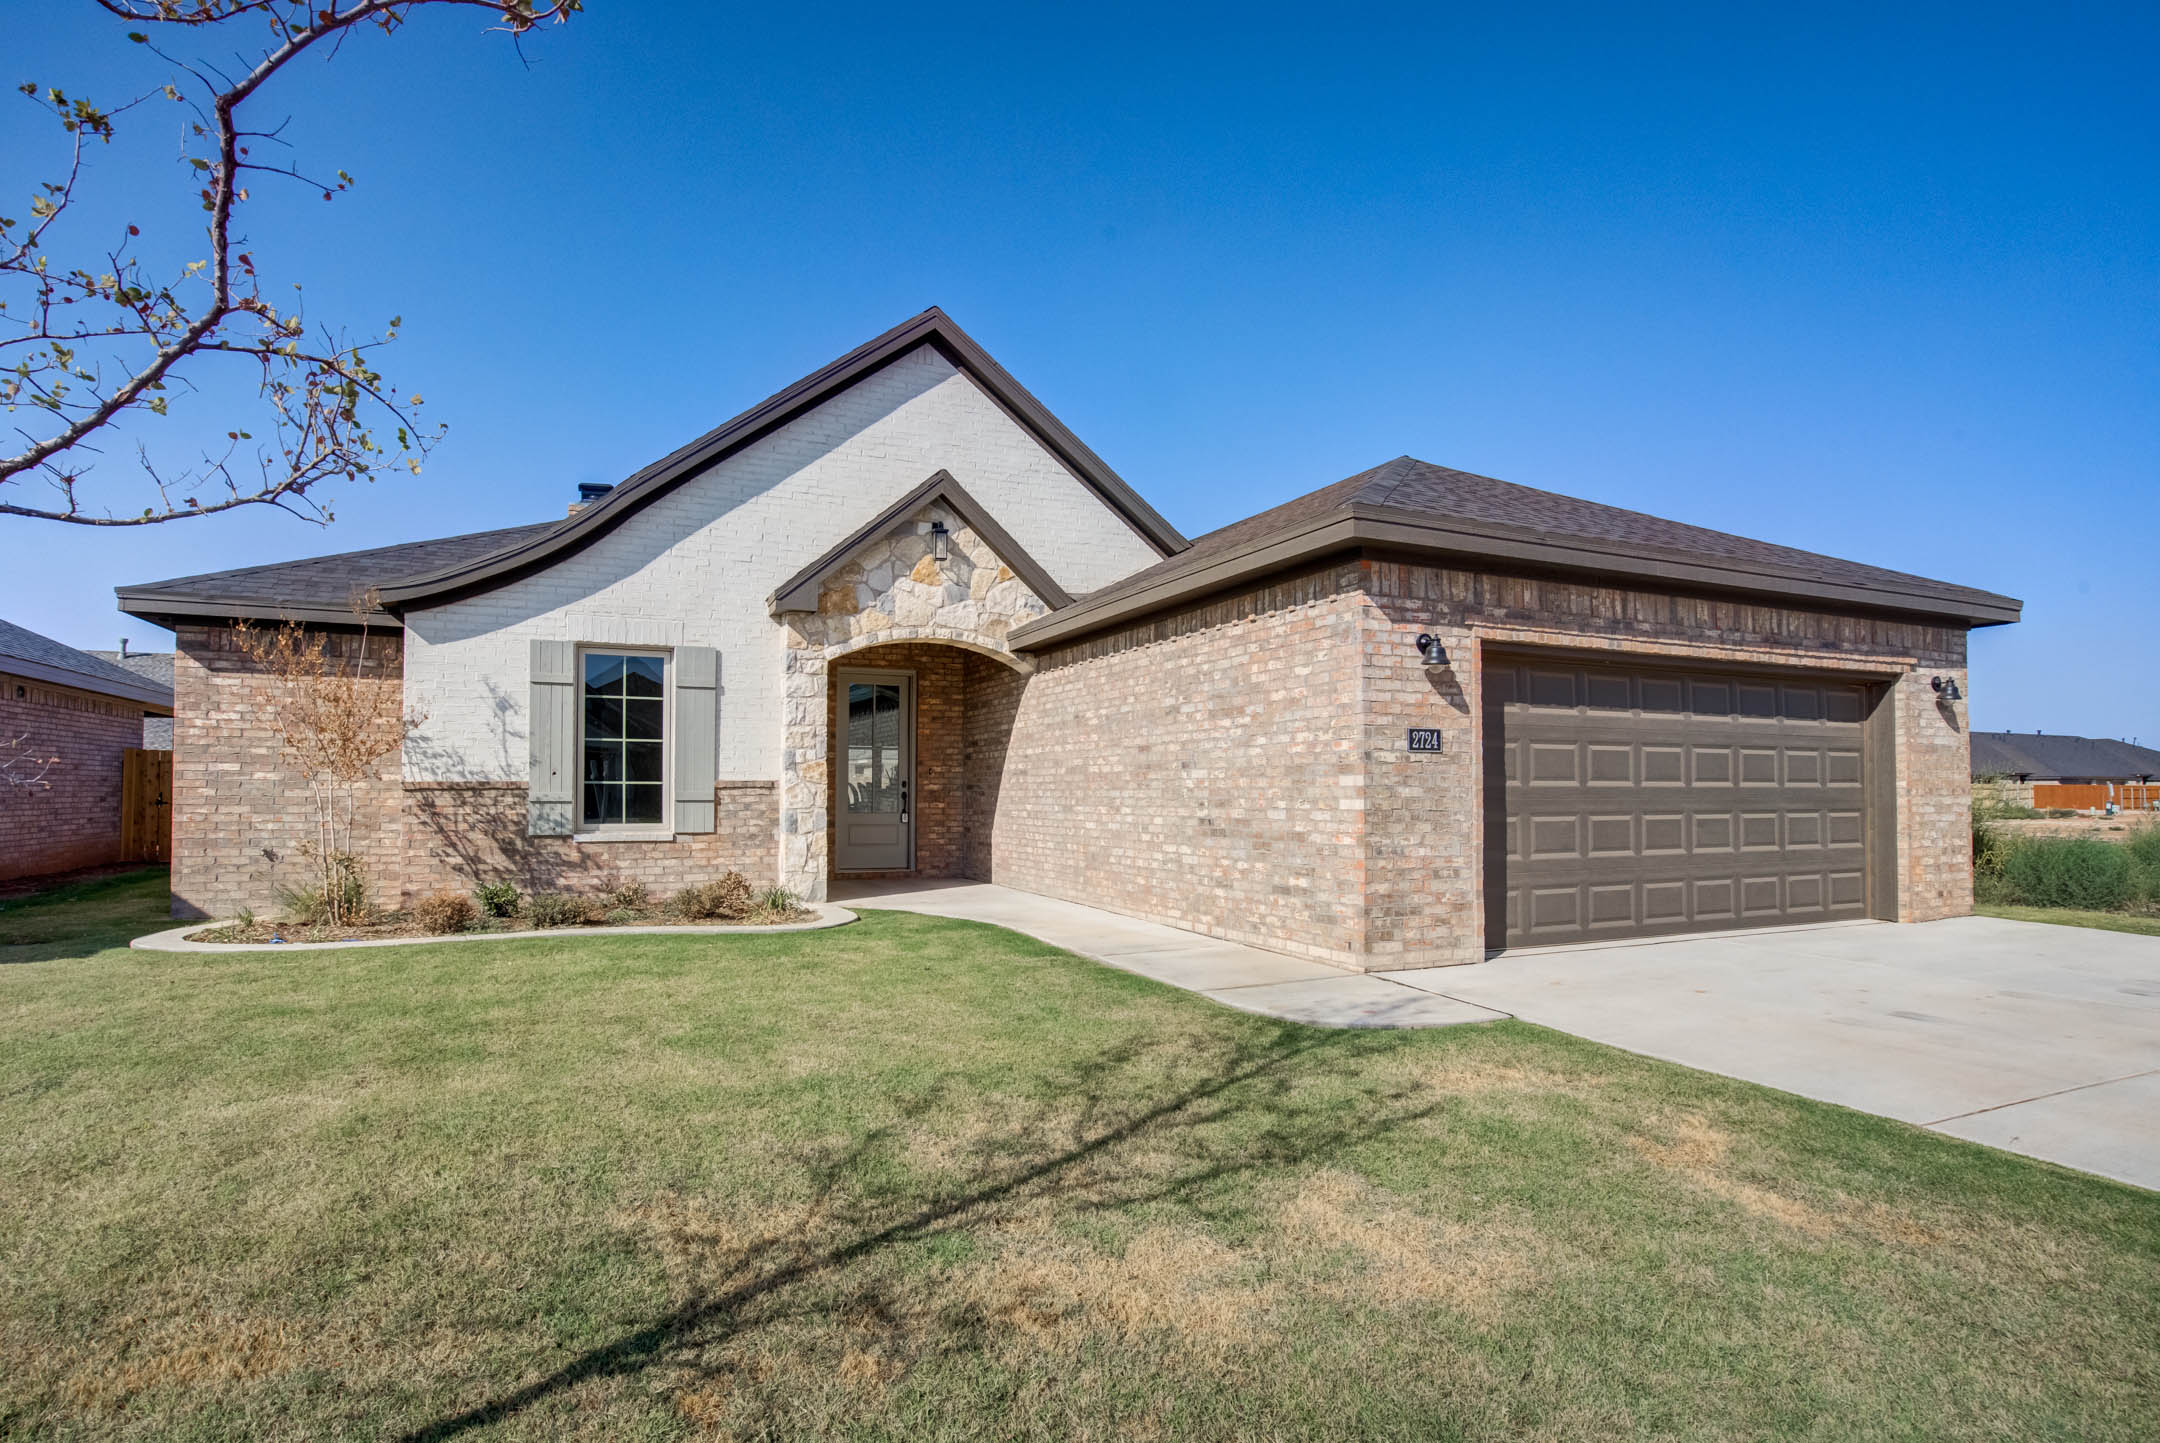 Exterior of beautiful new home for sale in Lubbock, Texas.